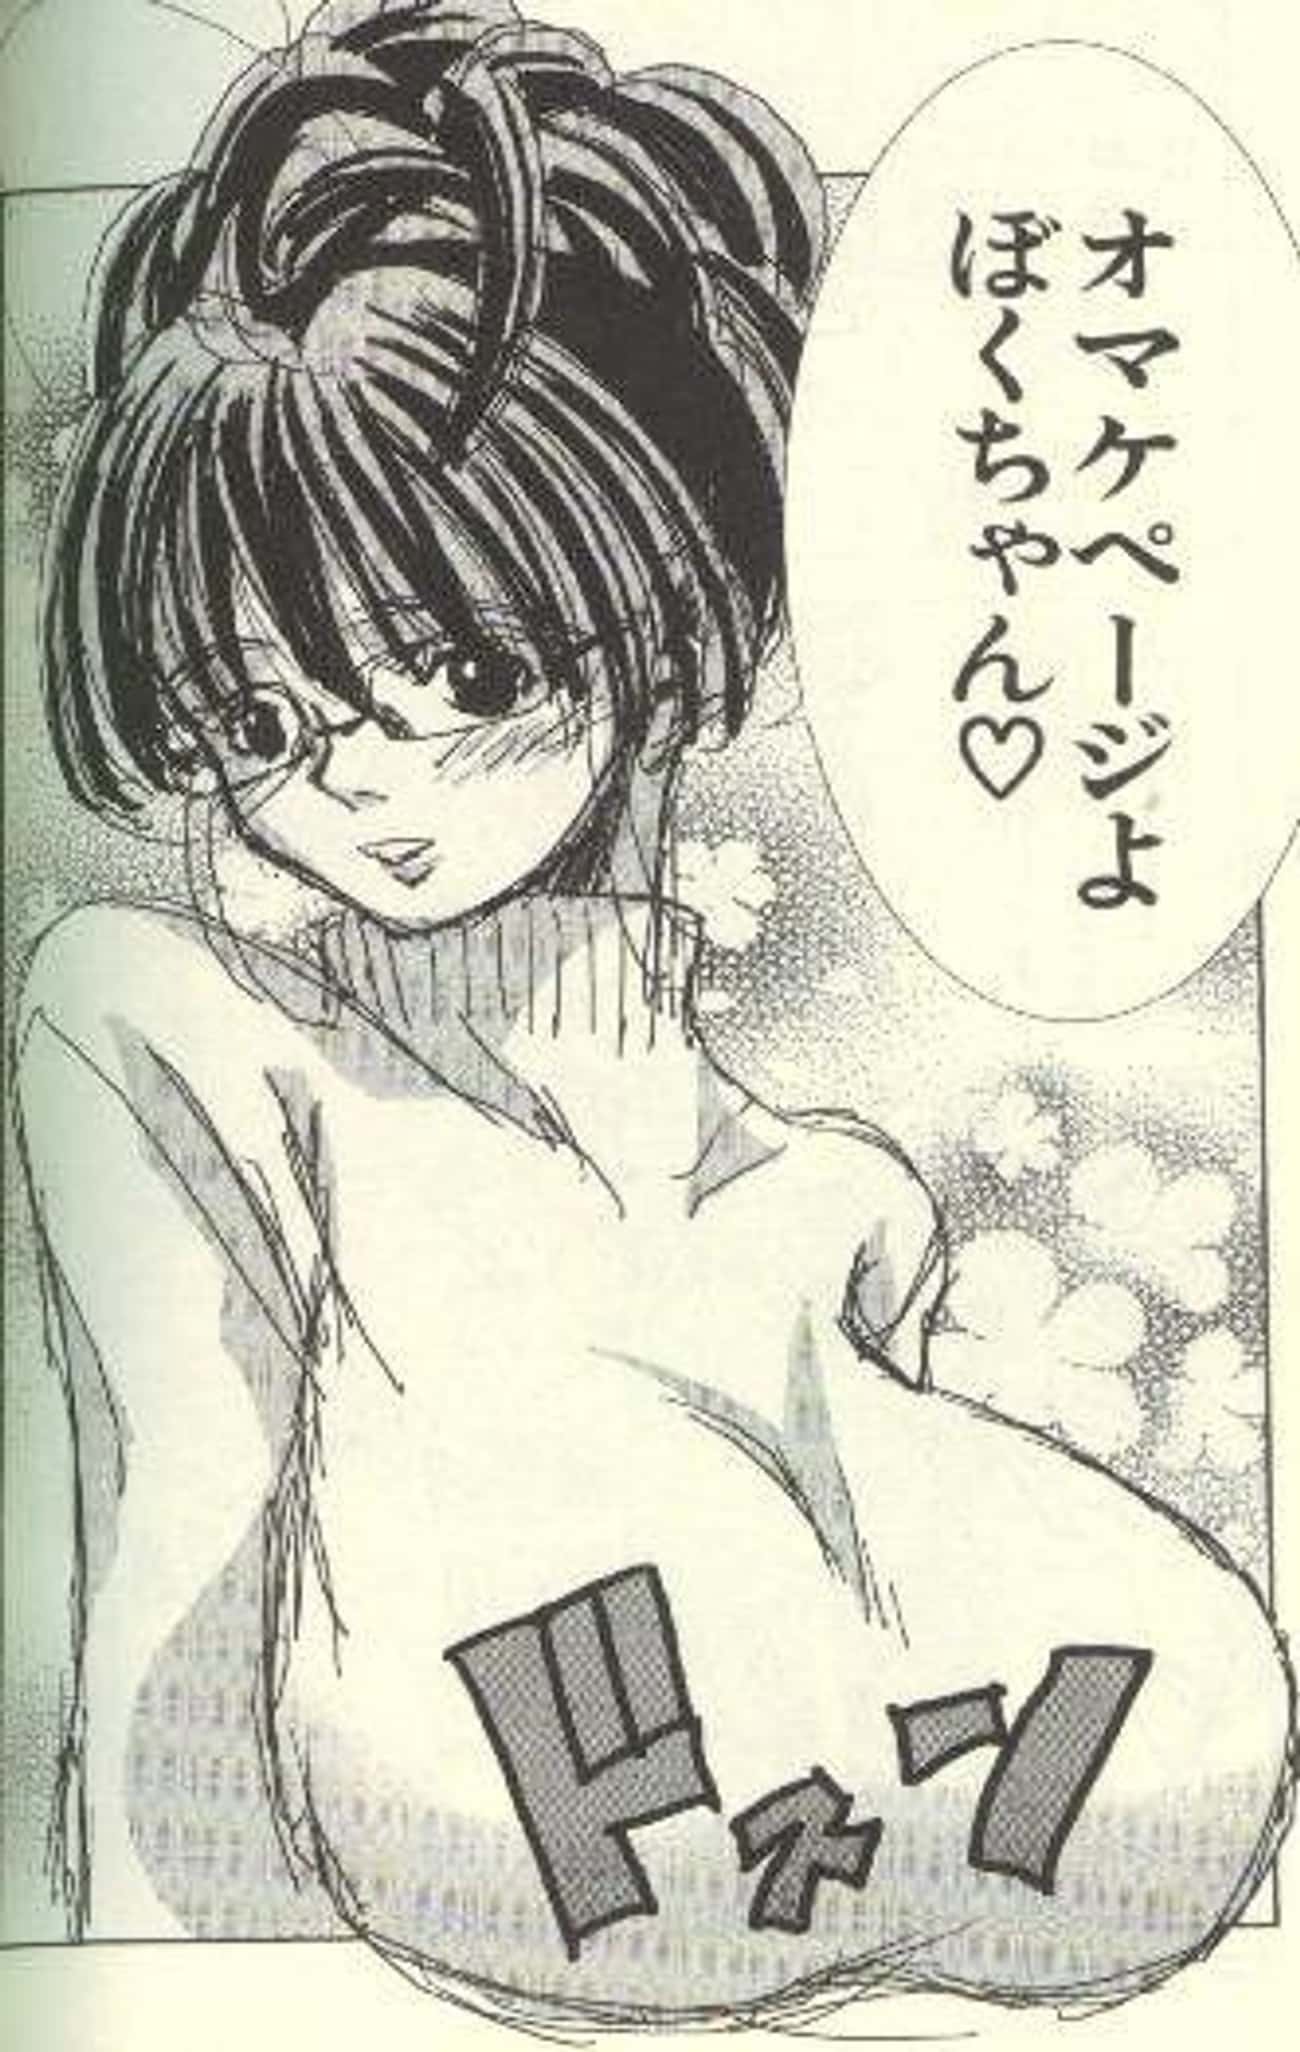 In &#39;Eiken Club,&#39; Keiko Shinonome&#39;s Weight Isn&#39;t In Line With Her Watermelon Sized Breasts